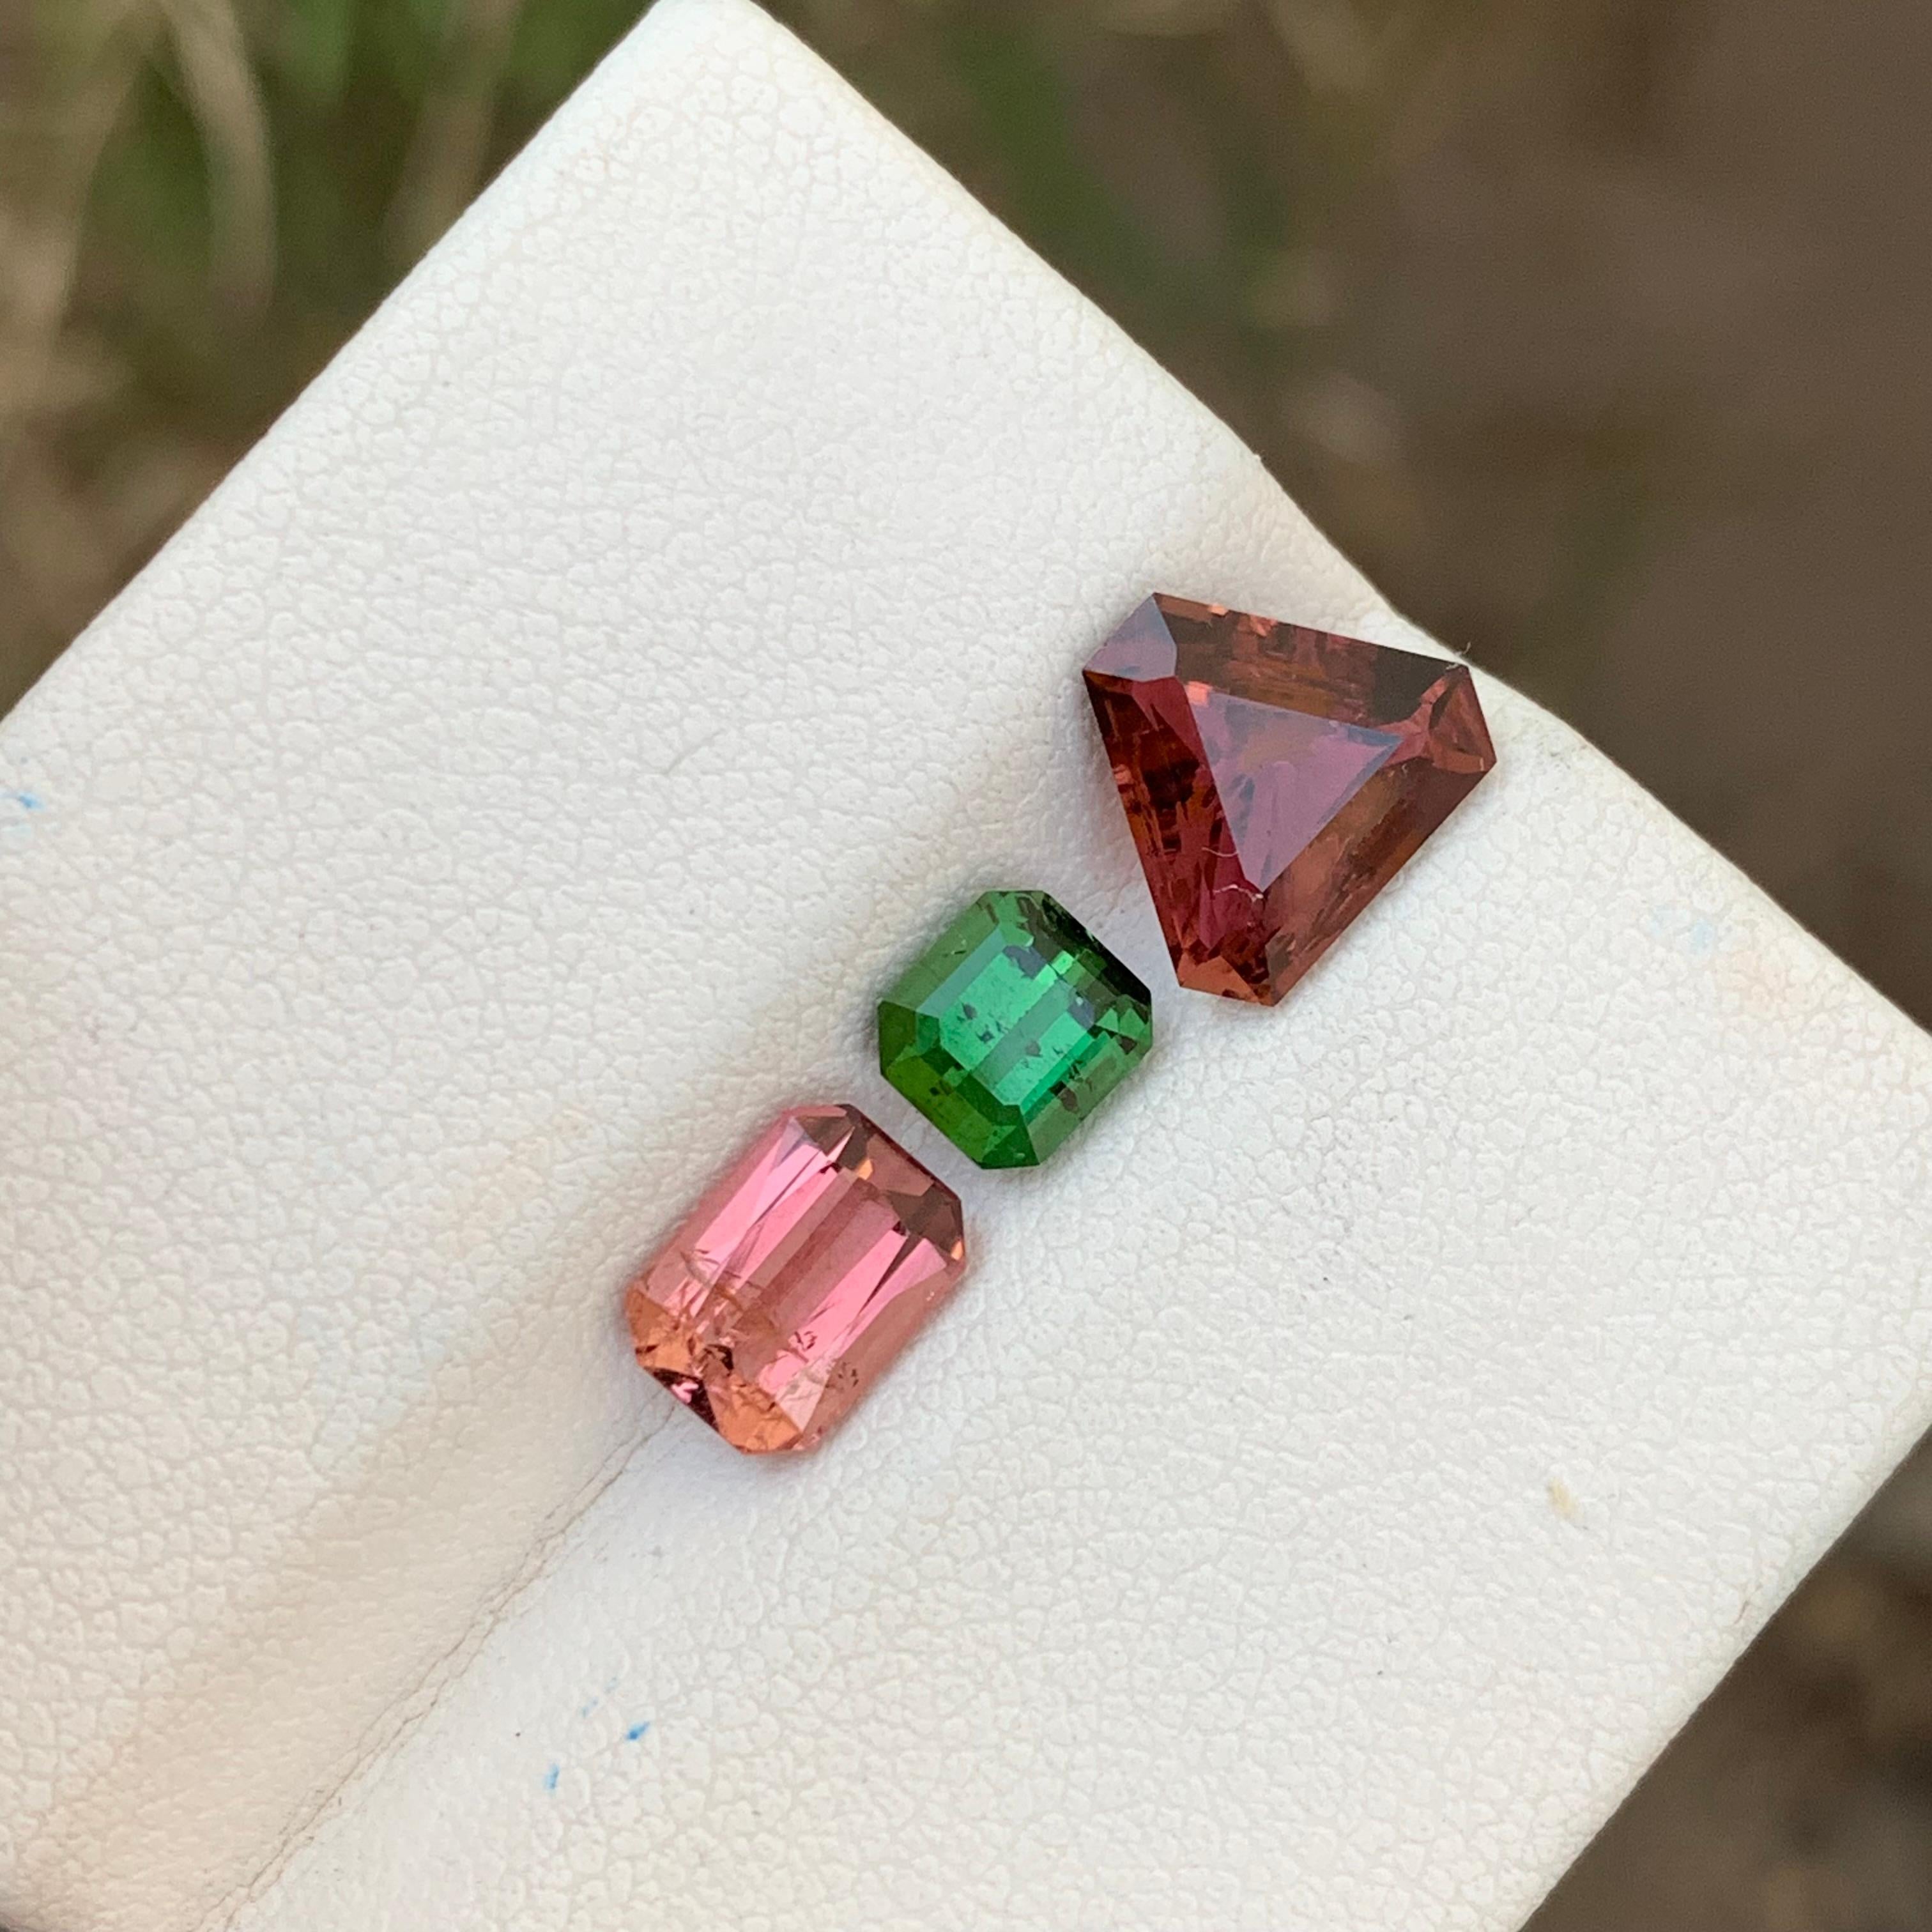 Loose Tourmaline 
Weight: 4.25 Carats 
Size: 1.85 , 1.35 , 0.95 Carats 
Origin: Kunar Afghanistan 
Shape: Emerald, Trillion, Cushion
Treatment: Non
Color: Pink , Green & Red
Tourmaline, a captivating gemstone known for its stunning range of colors,